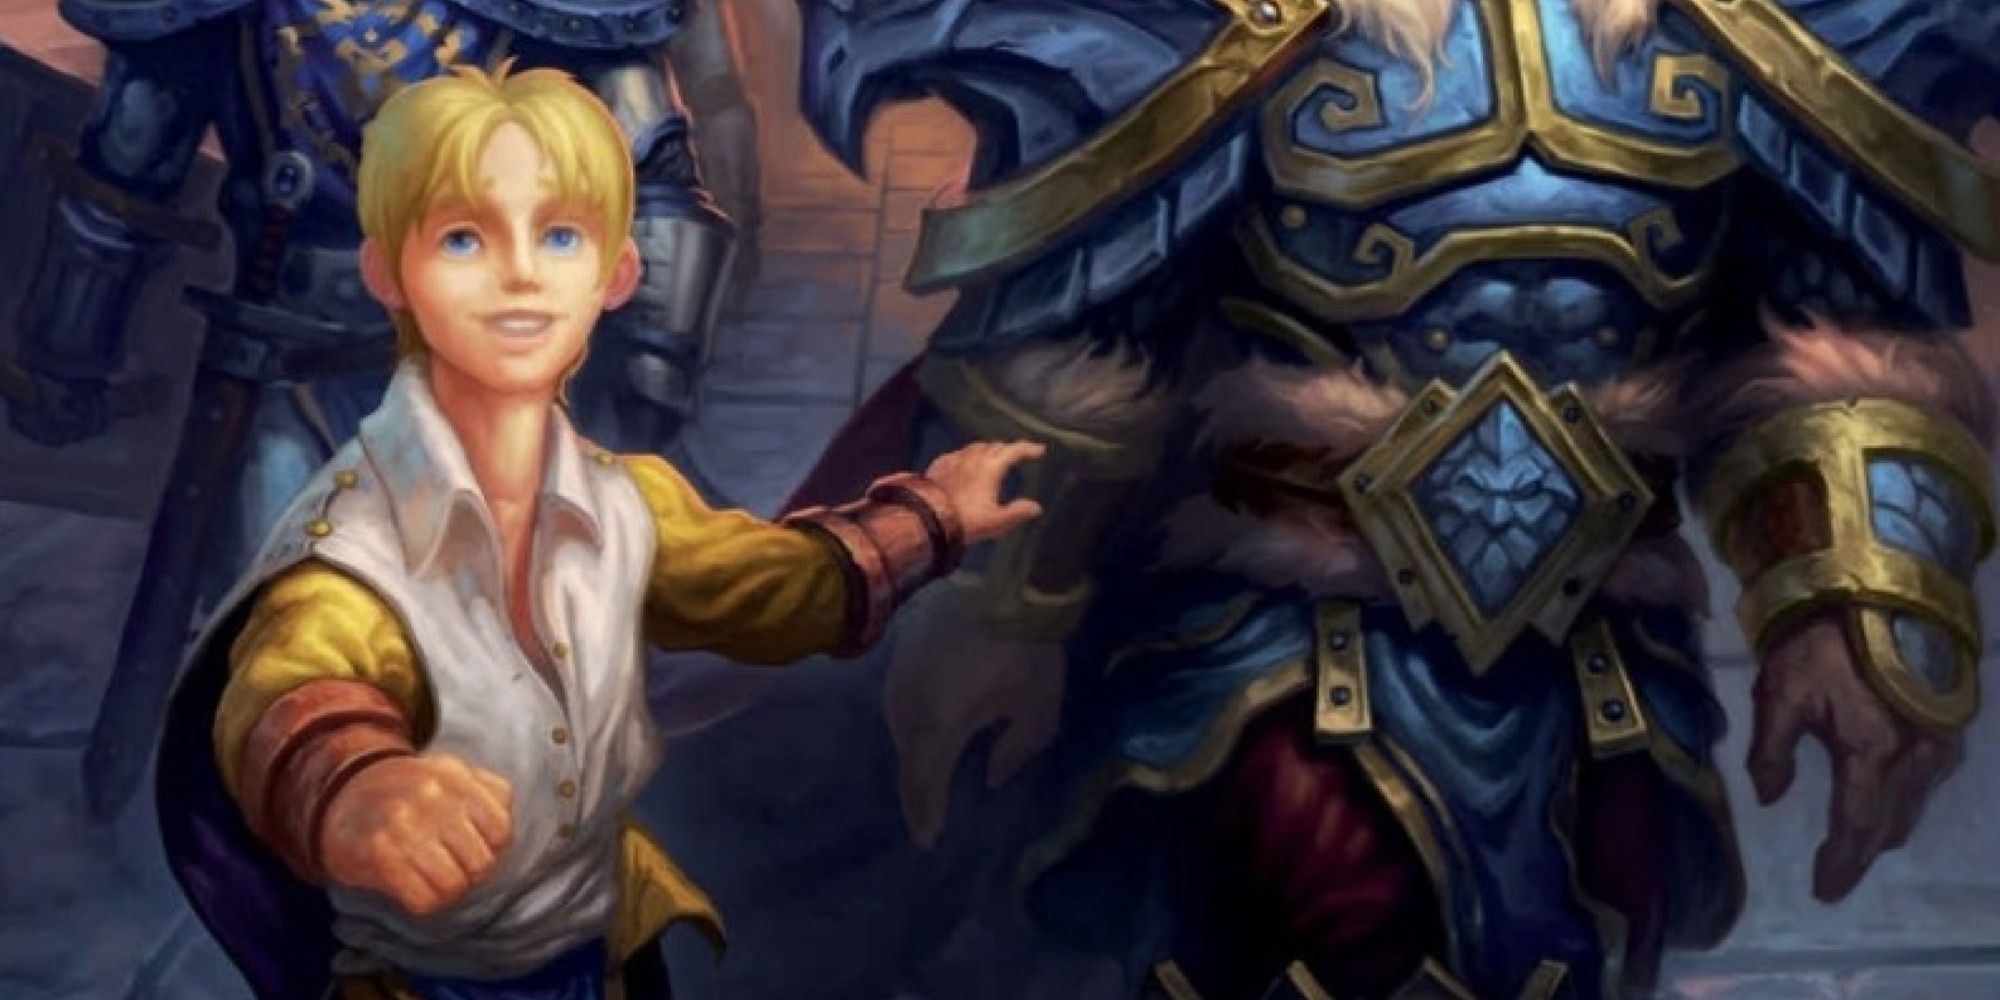 World of Warcraft young Anduin with his father Varian